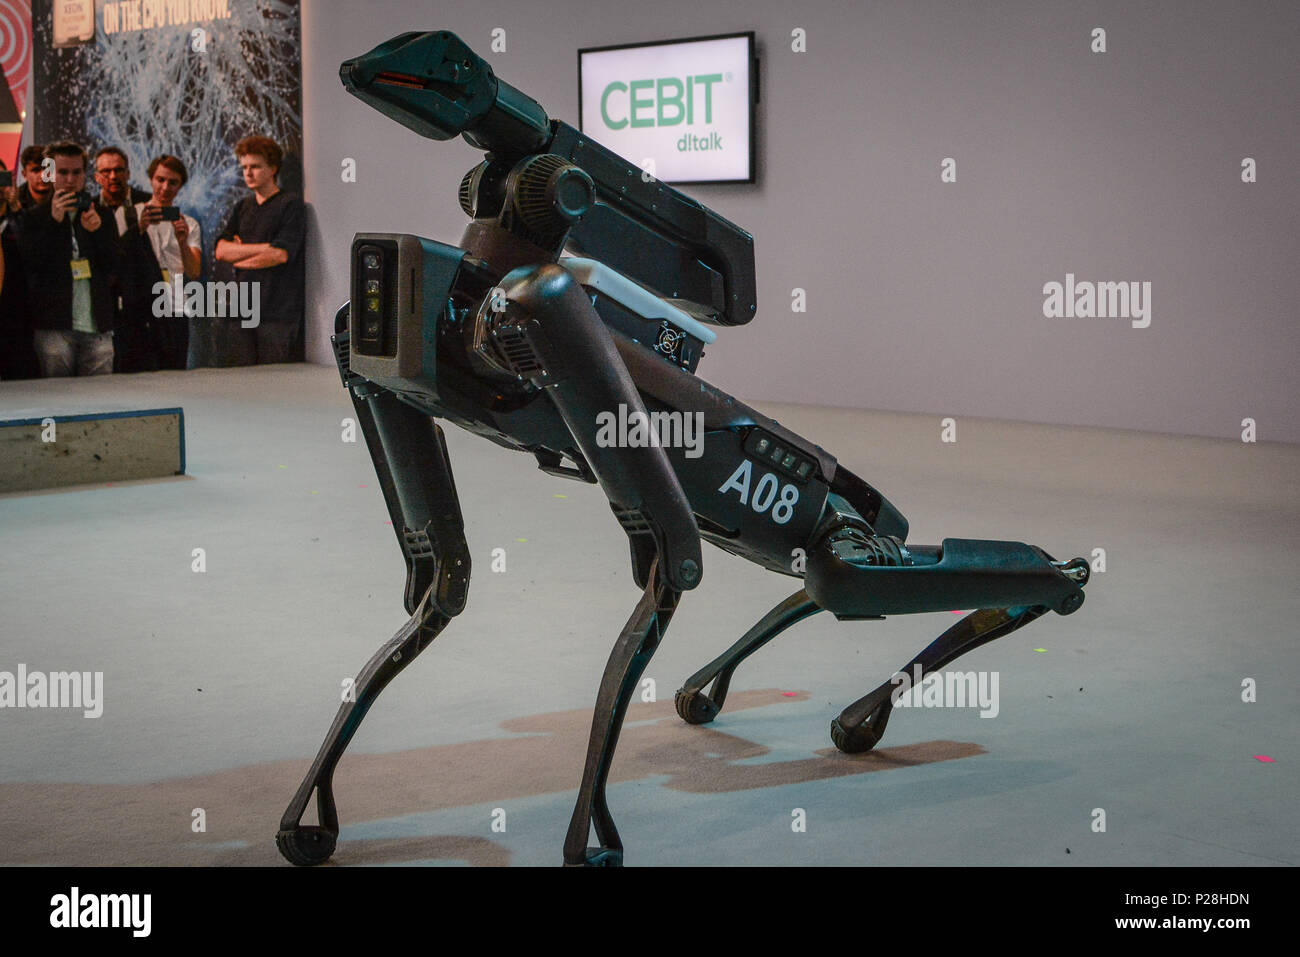 Hanover, Germany. 13th June, 2018. Marc Reibert, founder of Boston Dynamics,  presented the SpotMini robot at CeBIT 2018 in Hanover. SpotMini is a small  four-legged robot with the ability to pick up